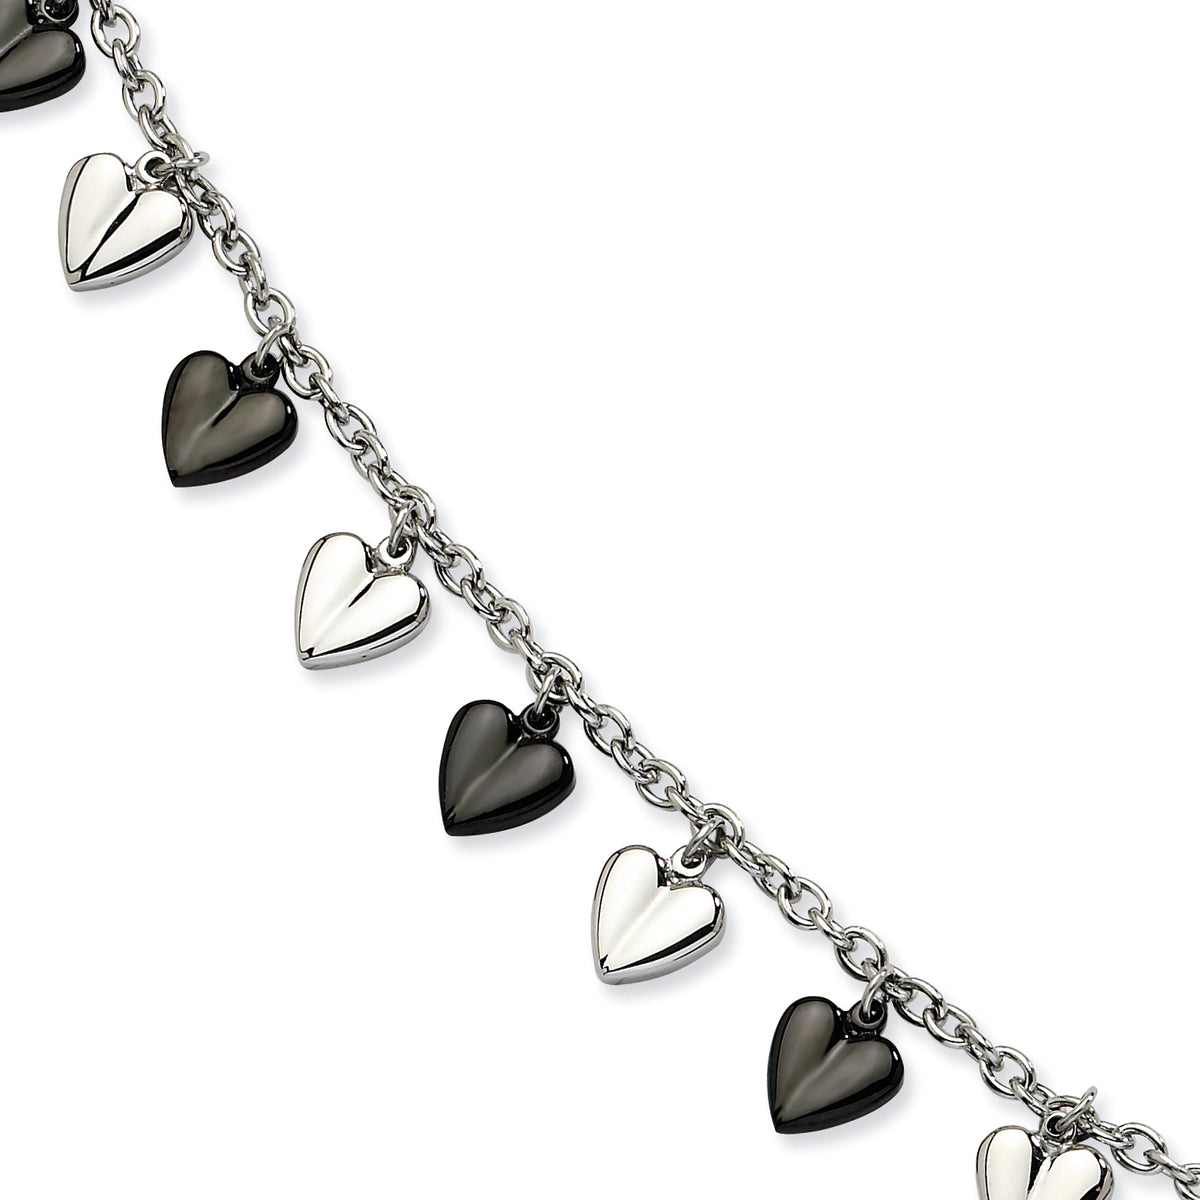 Stainless Steel Black IP-plated & Polished Hearts Bracelet